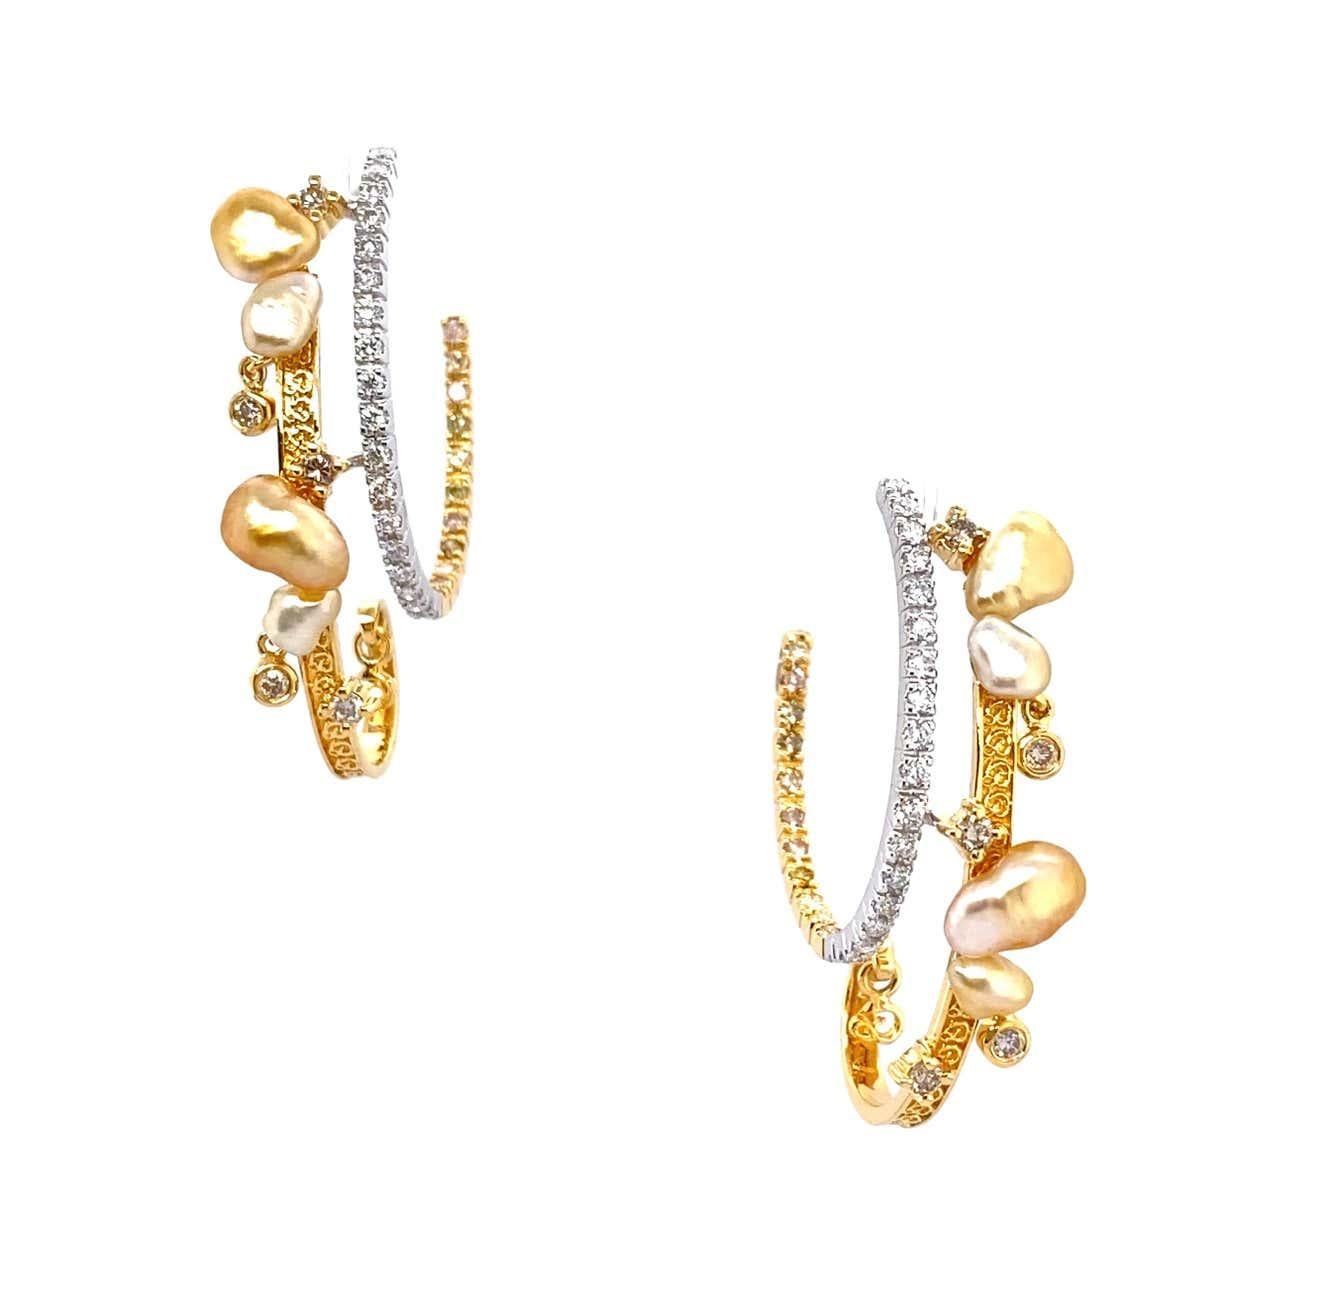 Made up of pure nacre, keshi pearls are a true luxury. LIke nuggets of gold, these double-hoop earrings by Dilys’ exhibit a contemporary yet artful play on the classic golden pearl. Designed by renowned Hong Kong jewelry designer – Dilys Young – the